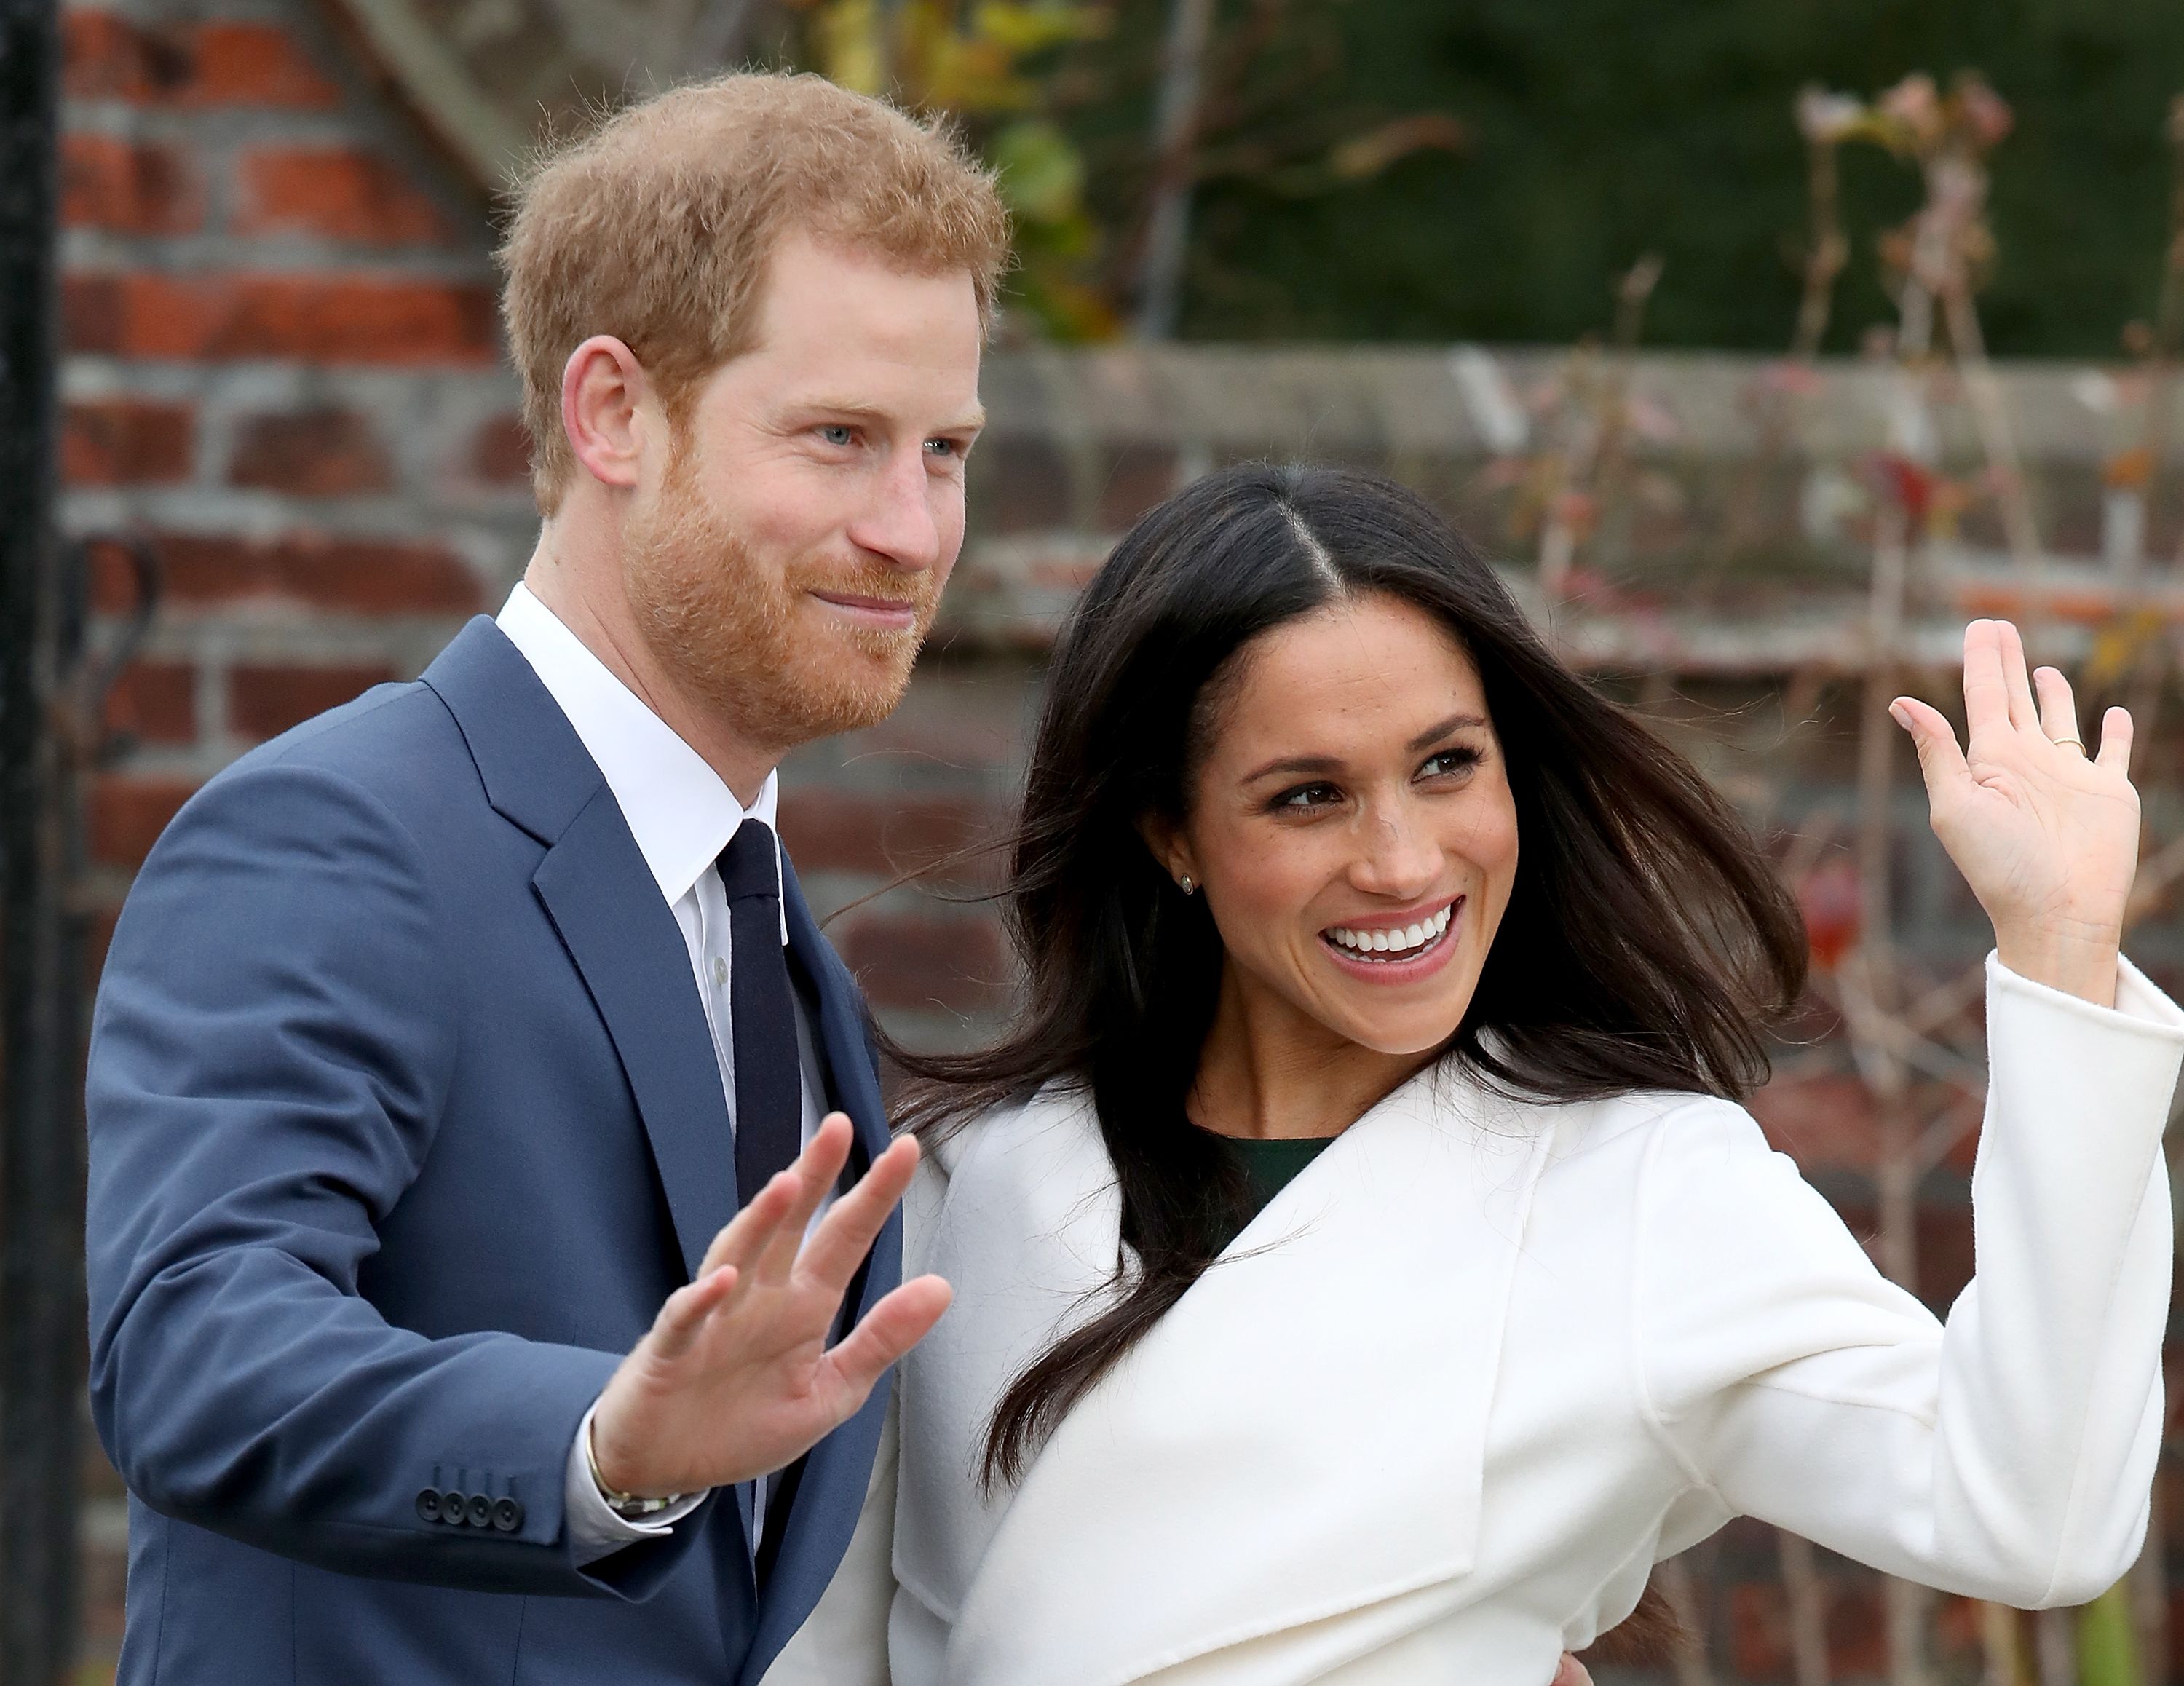 Prince Harry and Meghan Markle during an official photocall to announce their engagement at The Sunken Gardens at Kensington Palace on November 27, 2017 in London, England. | Source: Getty Images